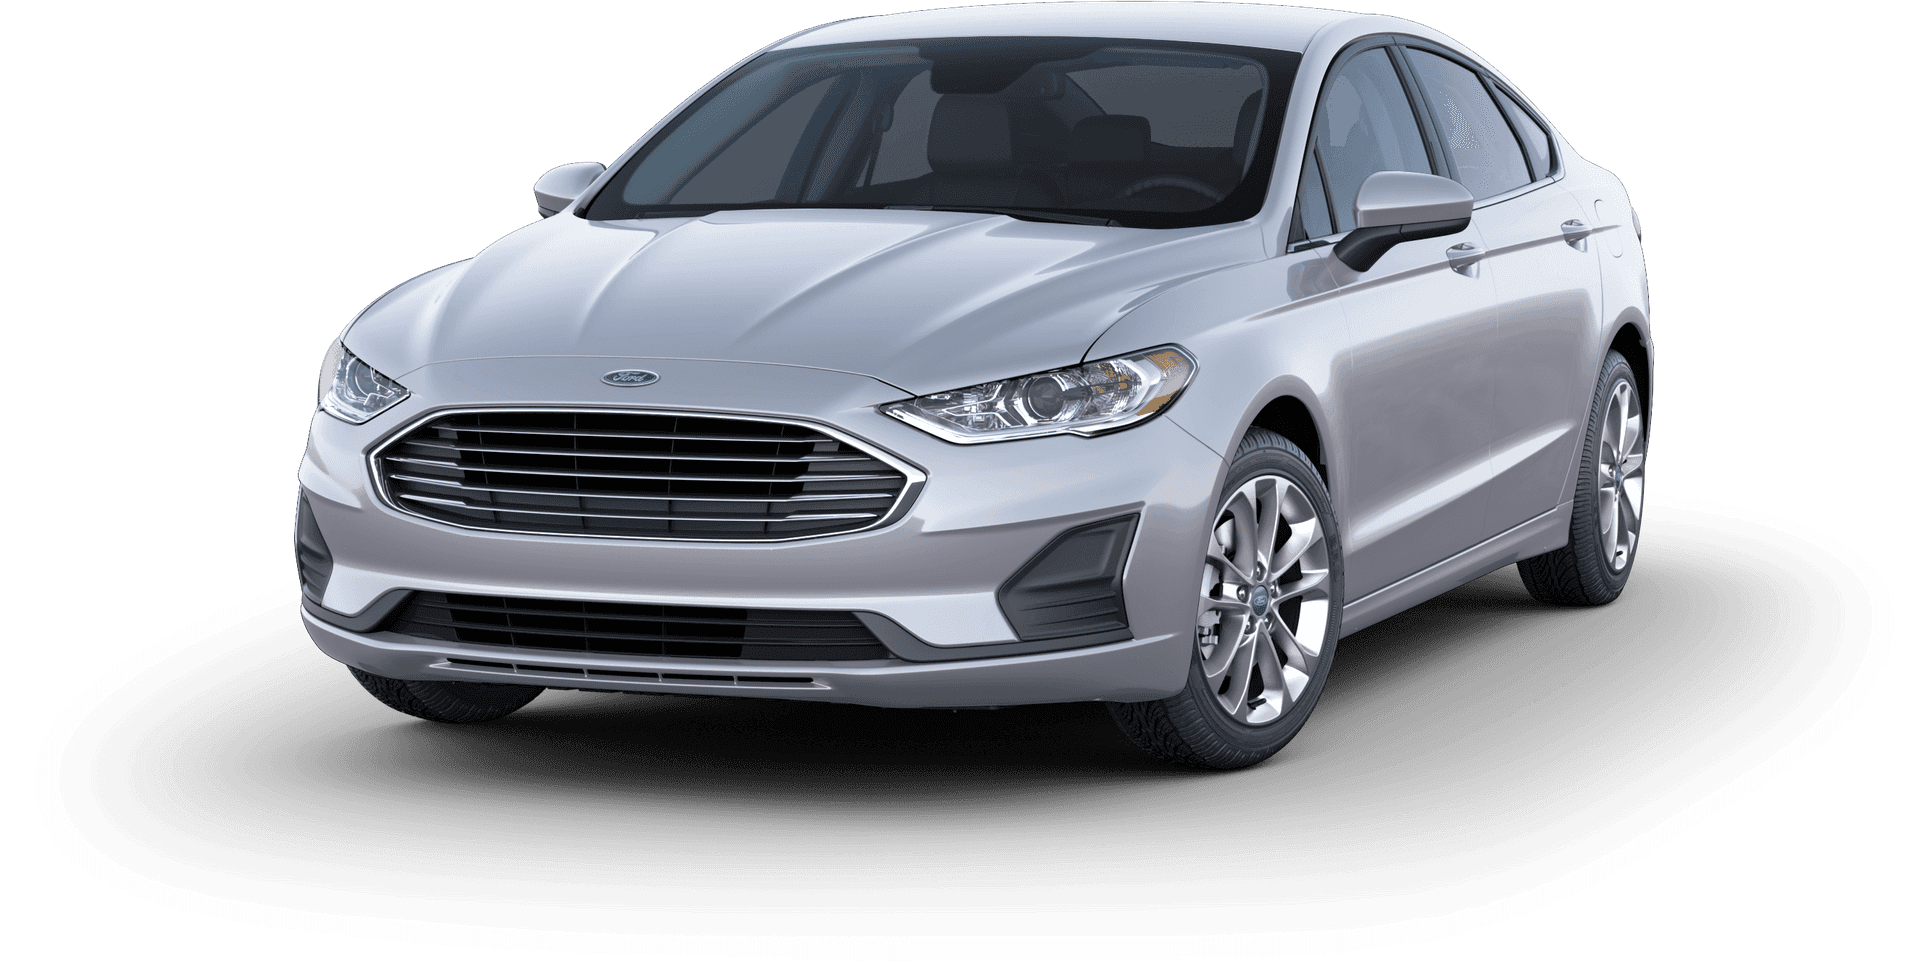 Silver Ford Fusion2020 Model PNG image